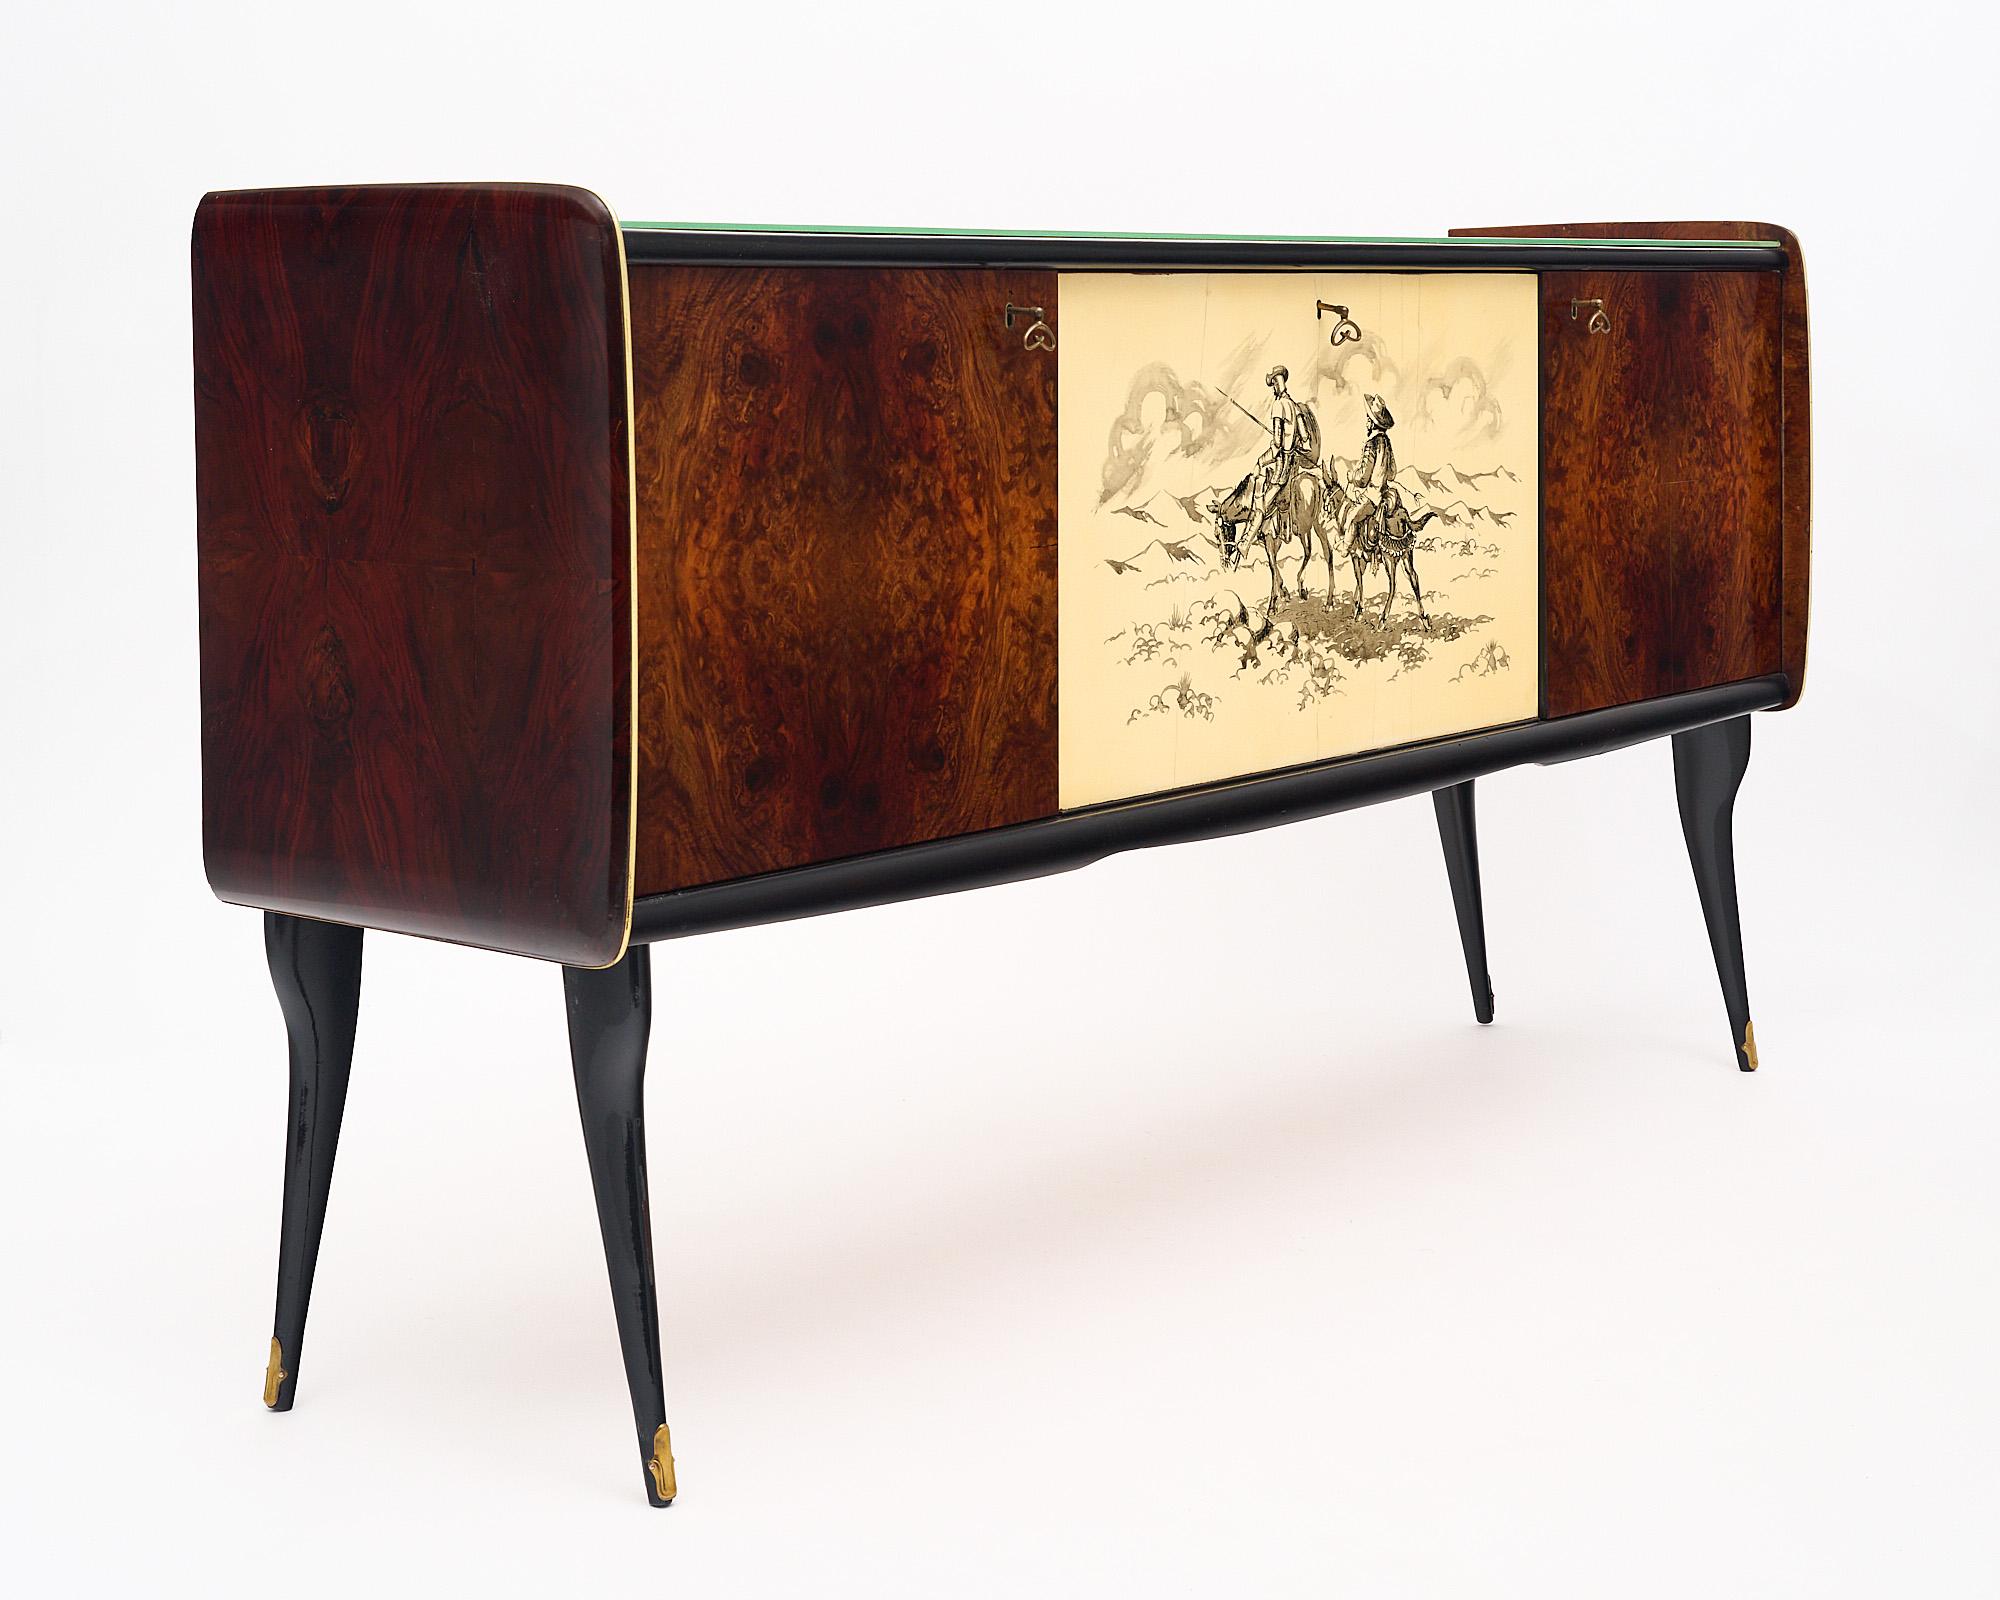 Buffet from the mid-century in Italy. This piece has two outer doors with a lovely burled veneer; while the central panel showcases a replication of an etching from Cervantes’ Don Quixote. We love the unique imagery and the striking decorative